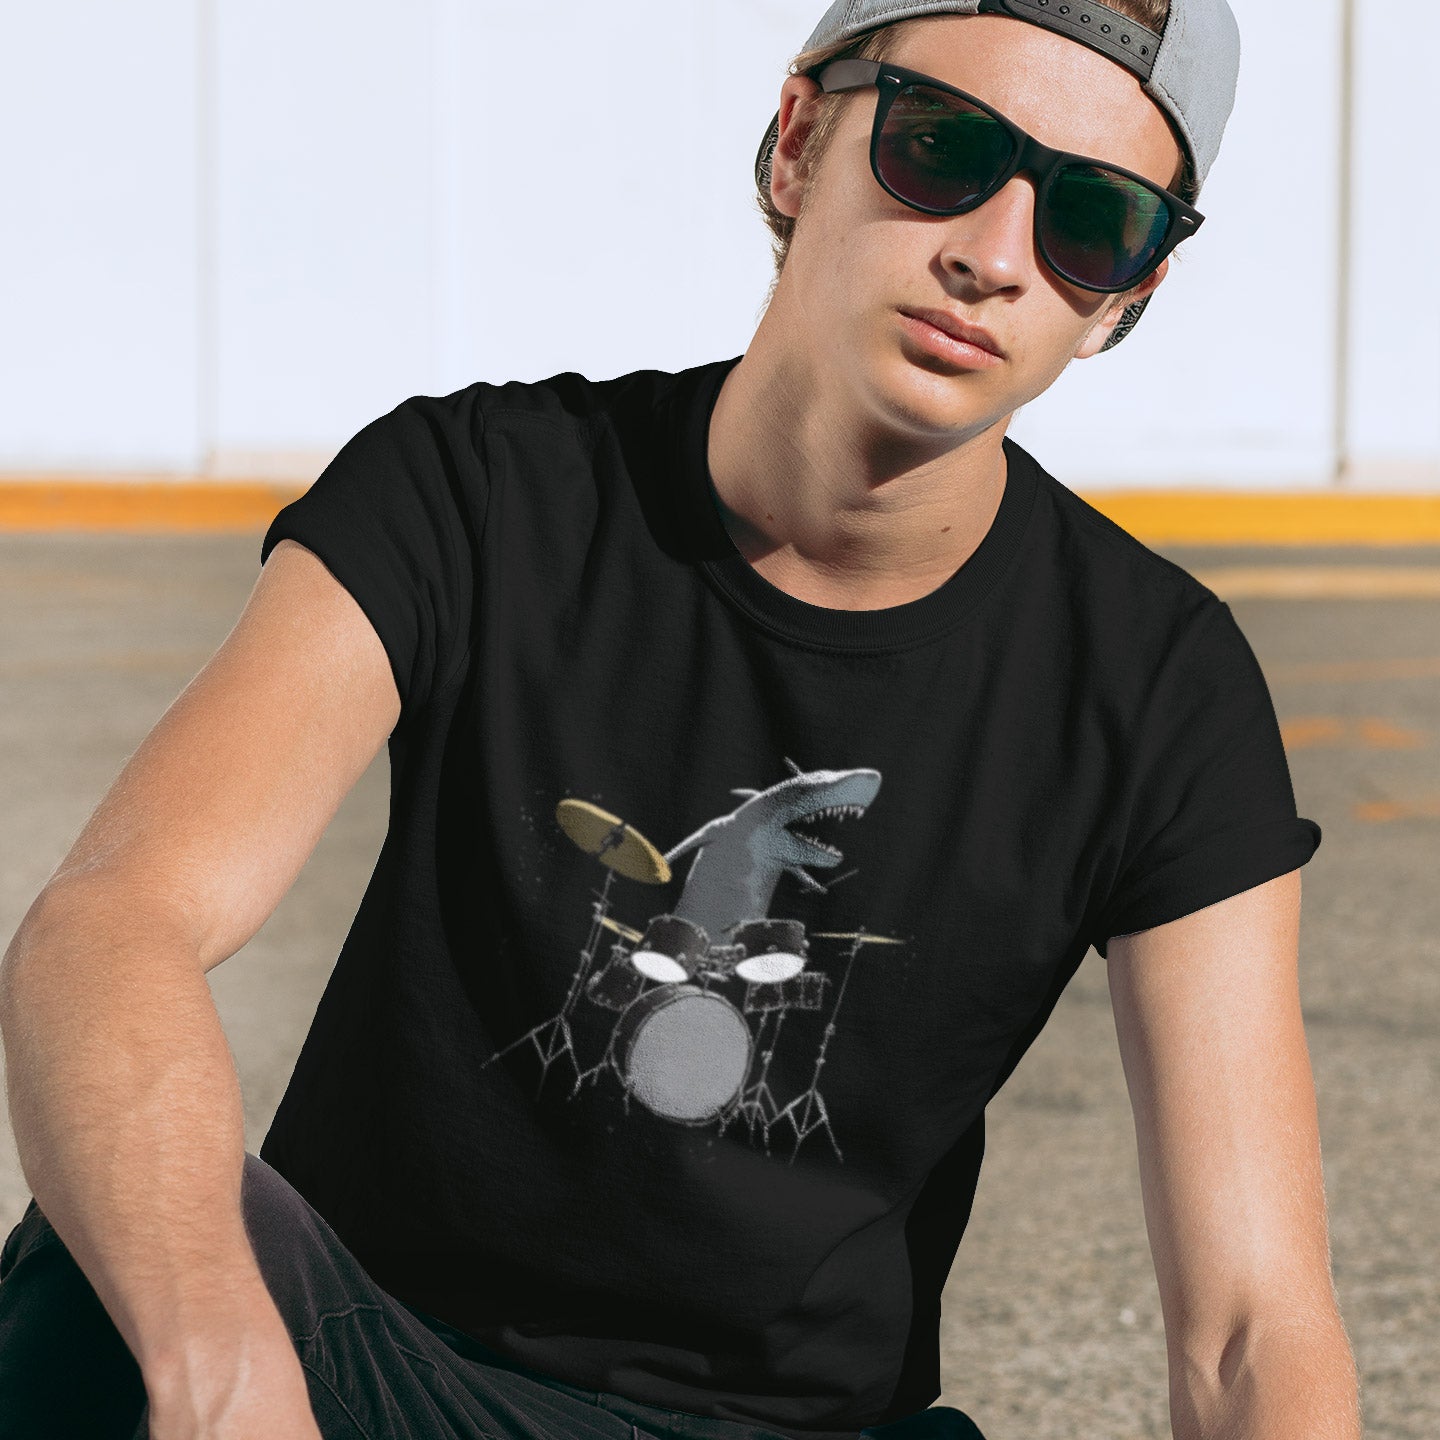 A man wearing a black t-shirt with a shark playing drums illustration